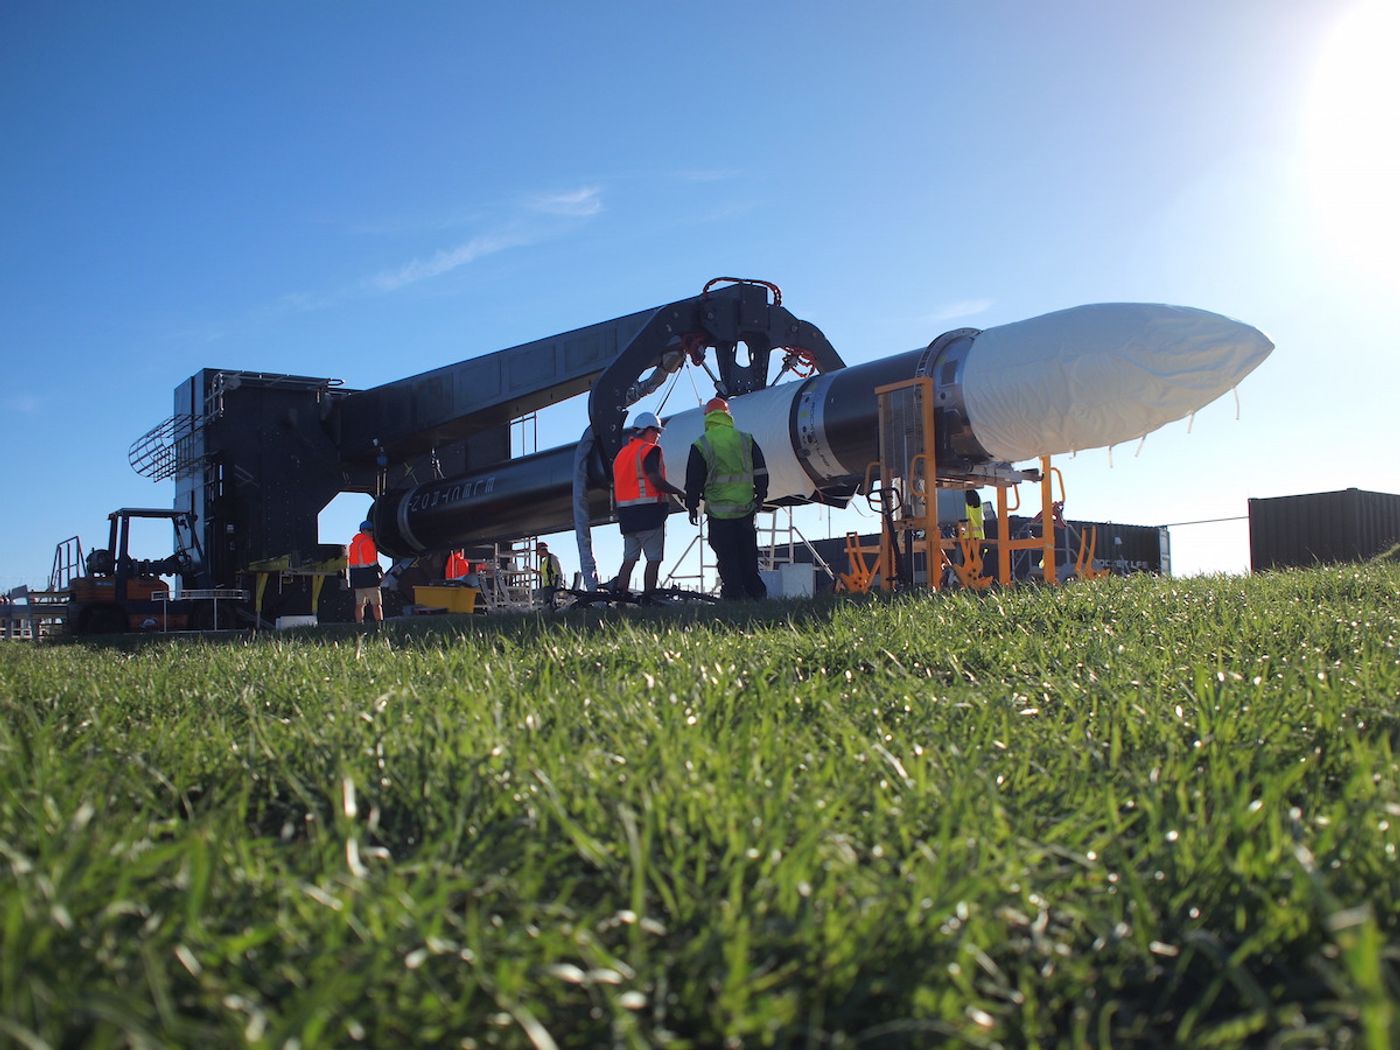 Rocket Lab's Electron Rocket remains grounded as weather conditions continue to remain unfavorable for a maiden voyage launch experiment.